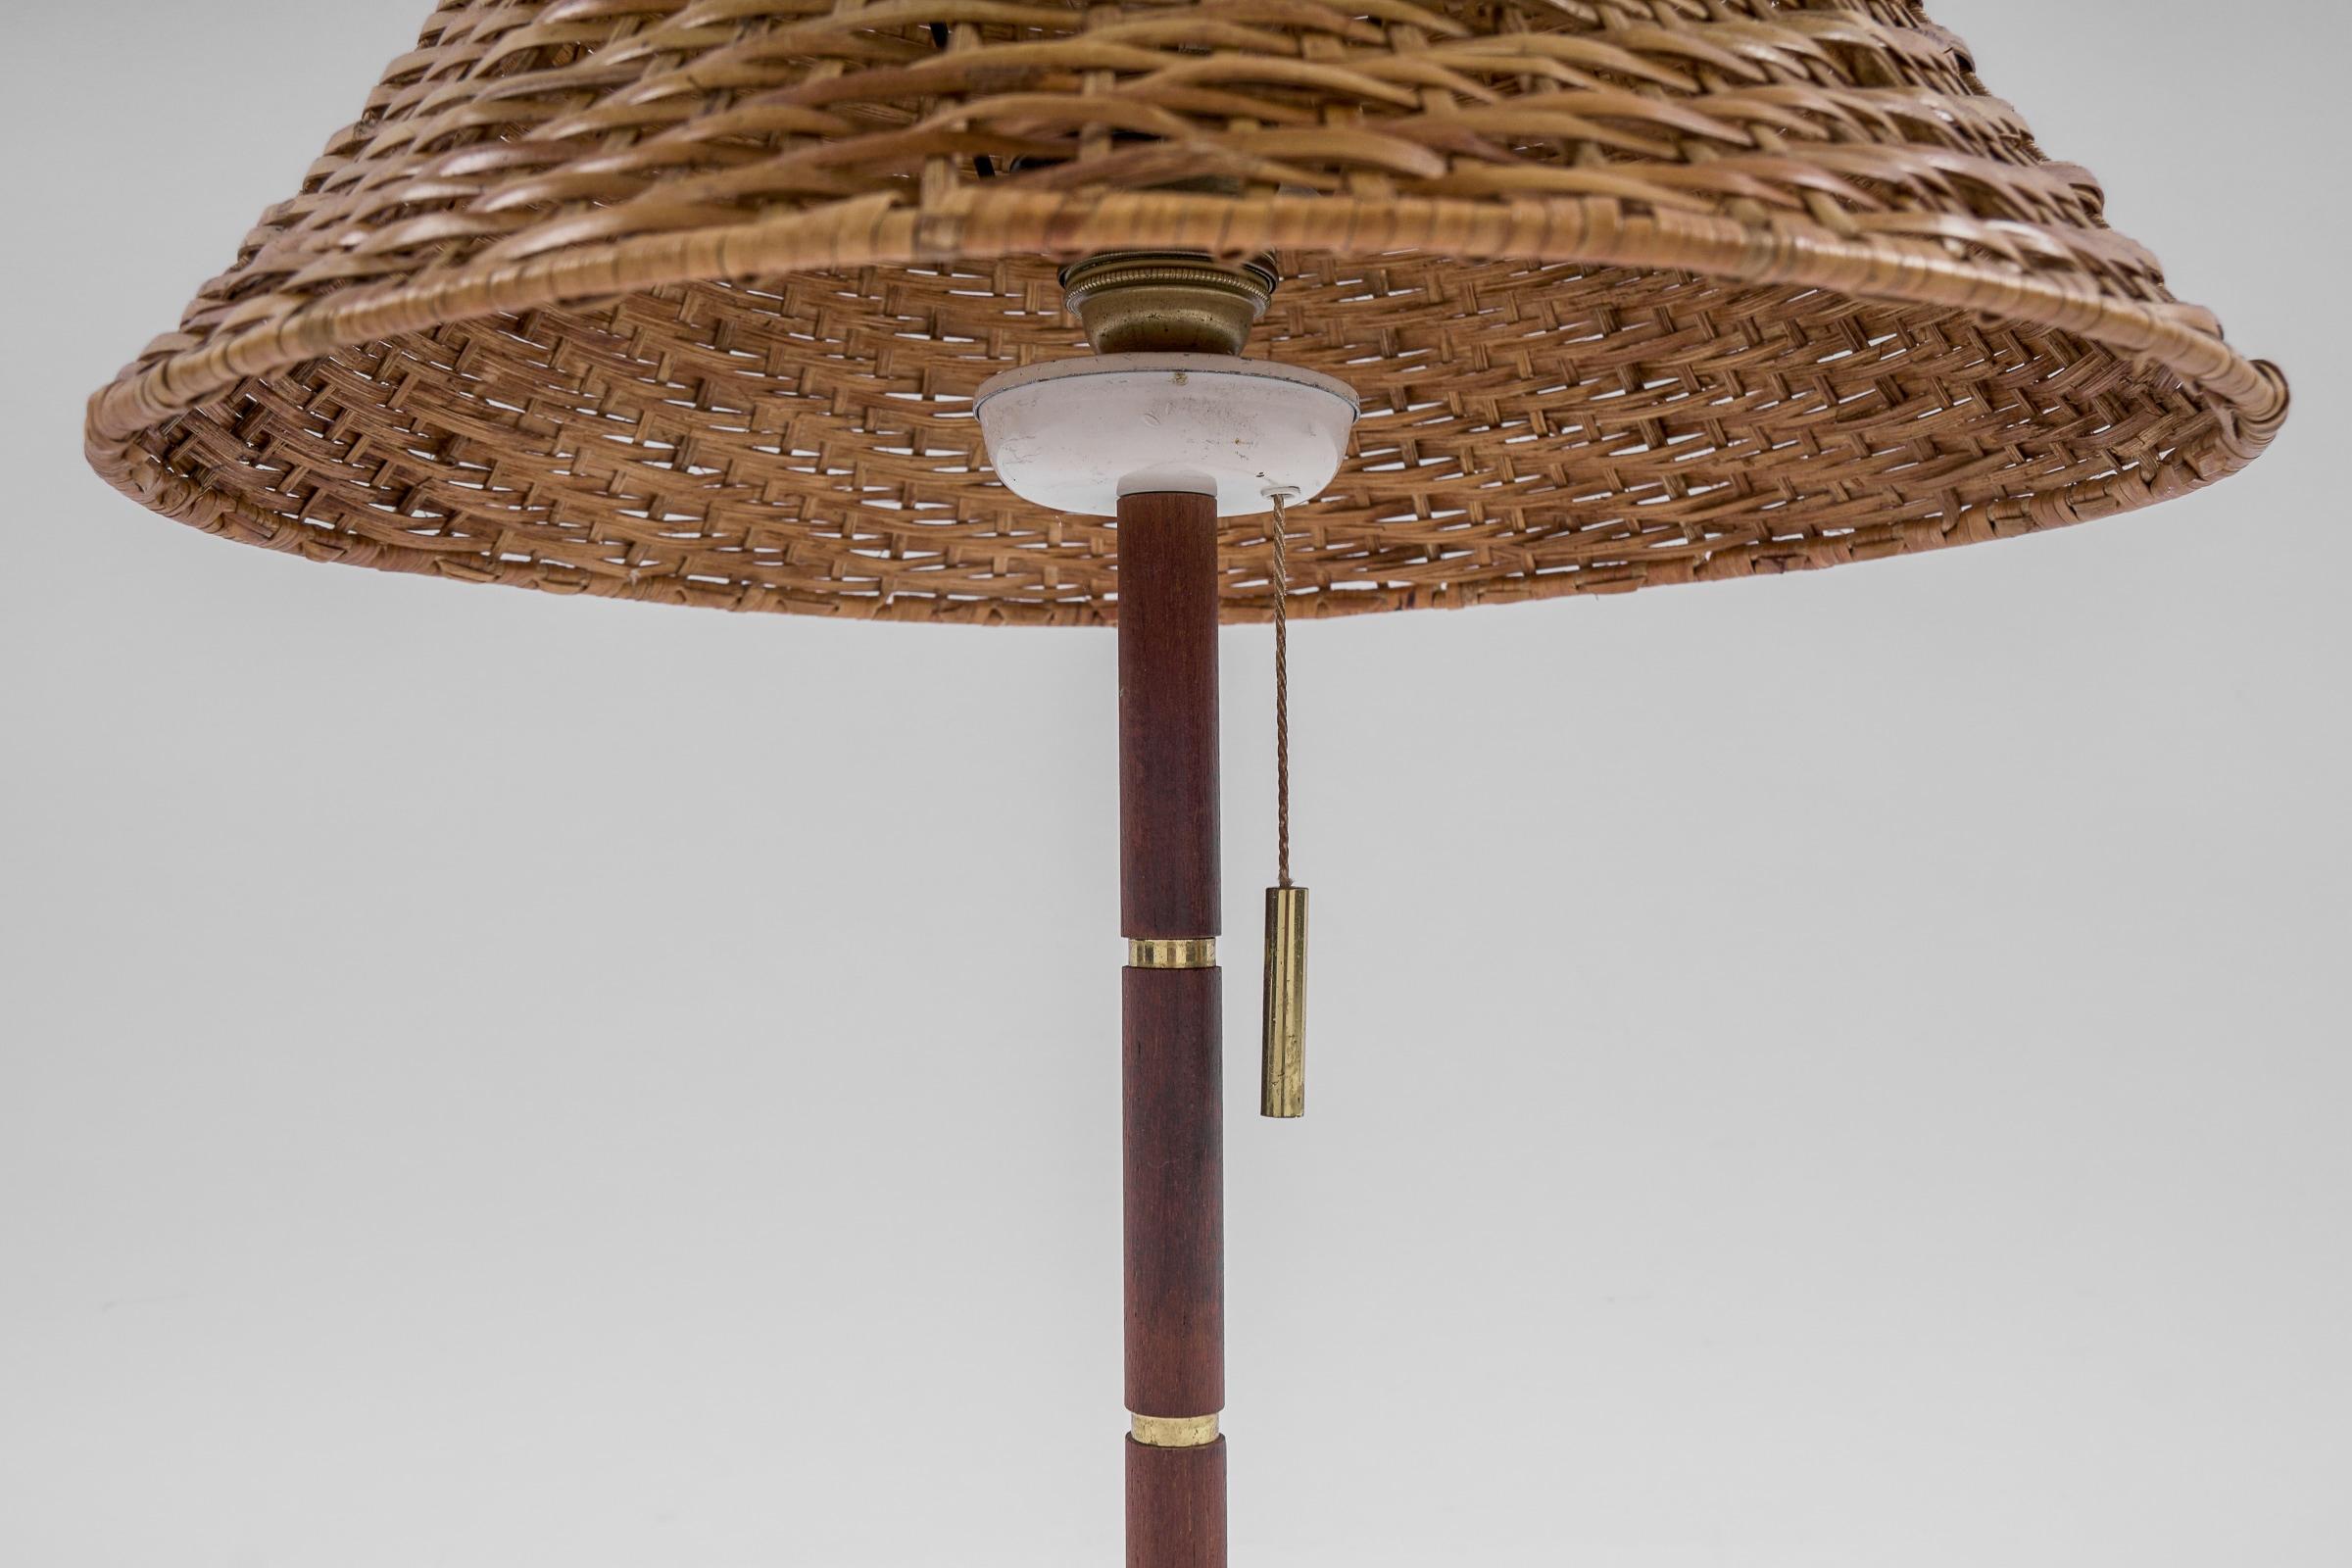 Lovely Mid-Century Modern Table Lamp in Brass, Wicker and Teak, 1950s, Austria For Sale 10